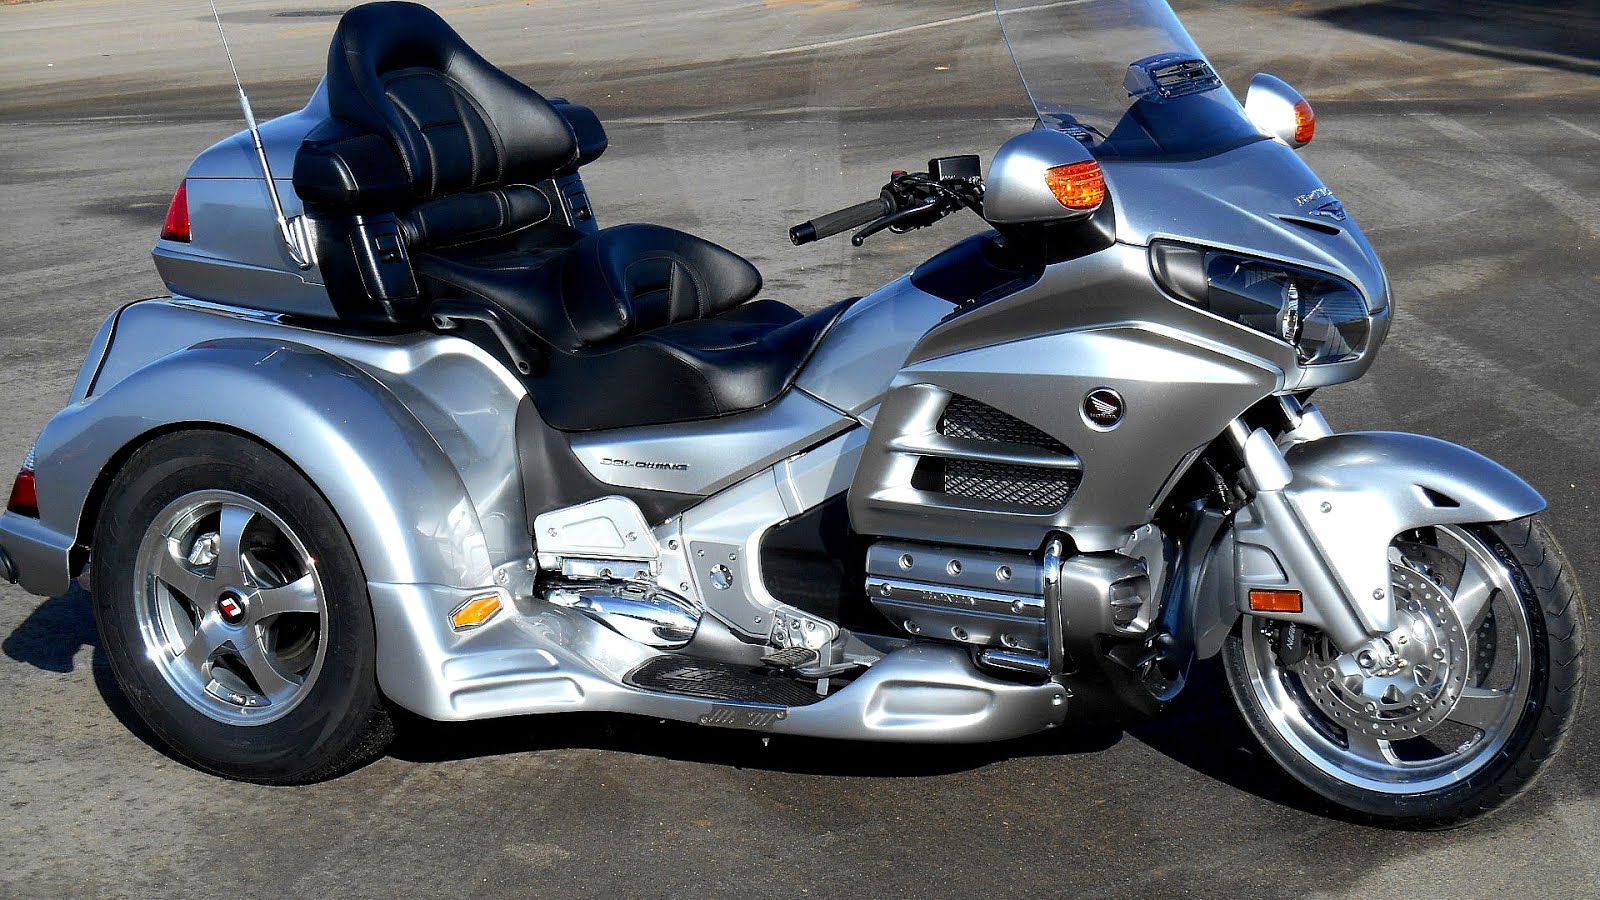 Used Honda Goldwing Trikes For Sale By Owner - Gold Choices